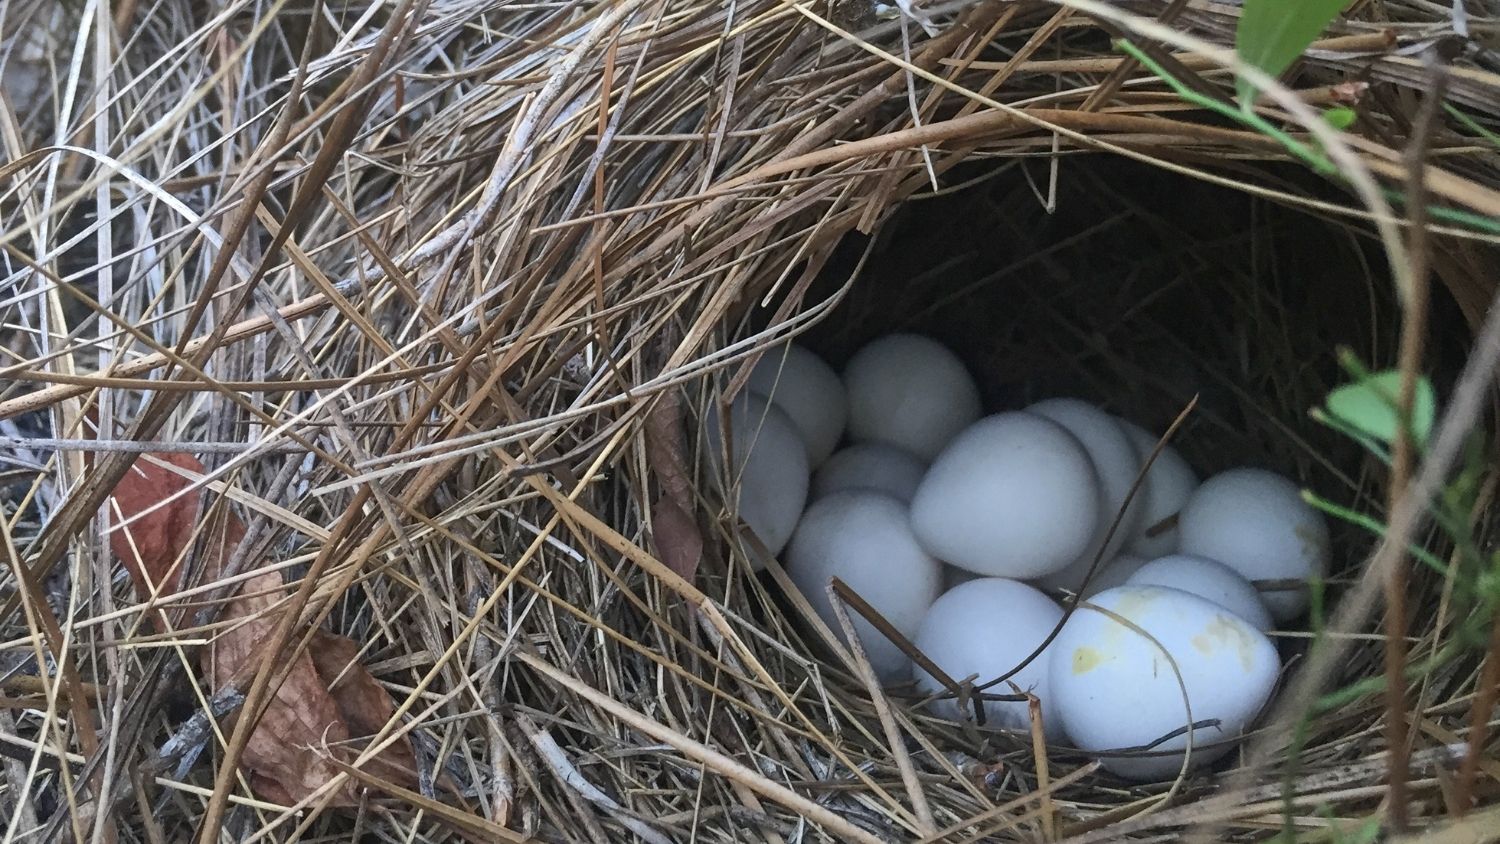 Burned northern bobwhite quail nest - Does Prescribed Fire Threaten Quail Nests? - College of Natural Resources News NC State University